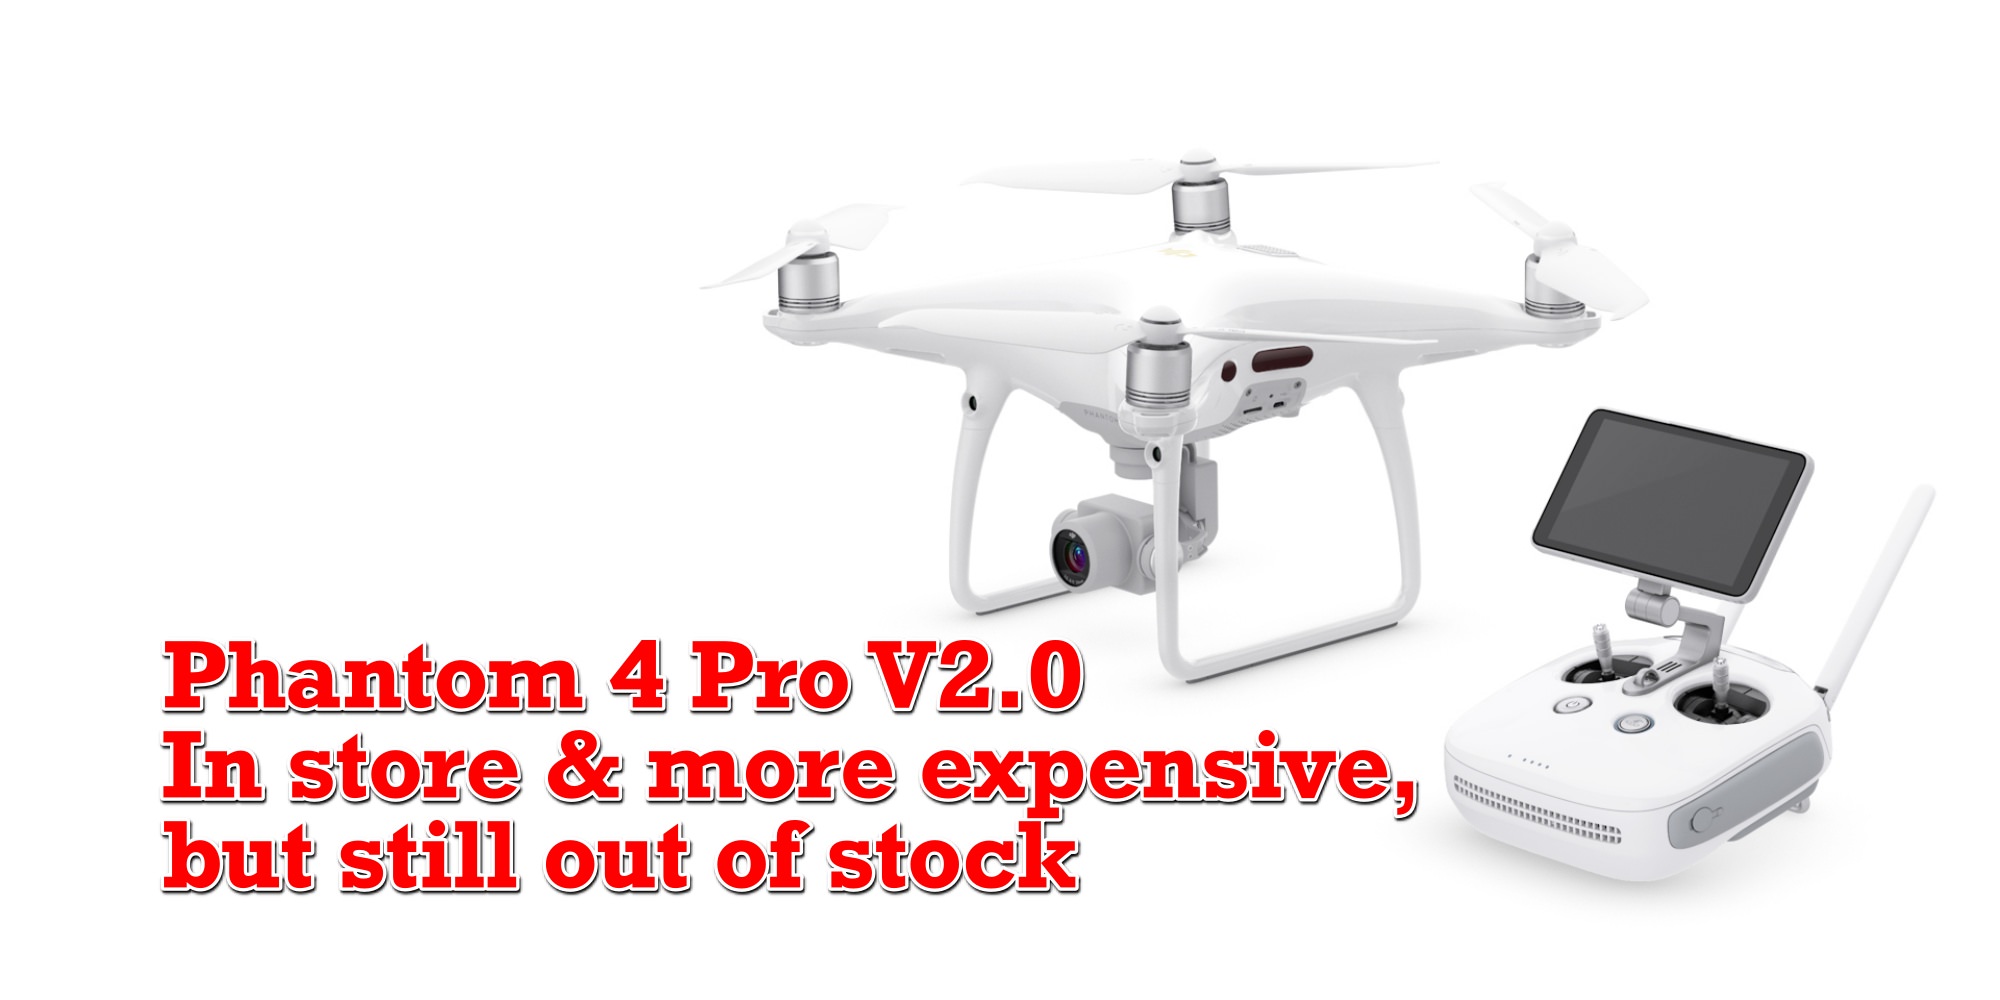 Phantom Pro V2.0 back in DJI online store higher price and out of stock